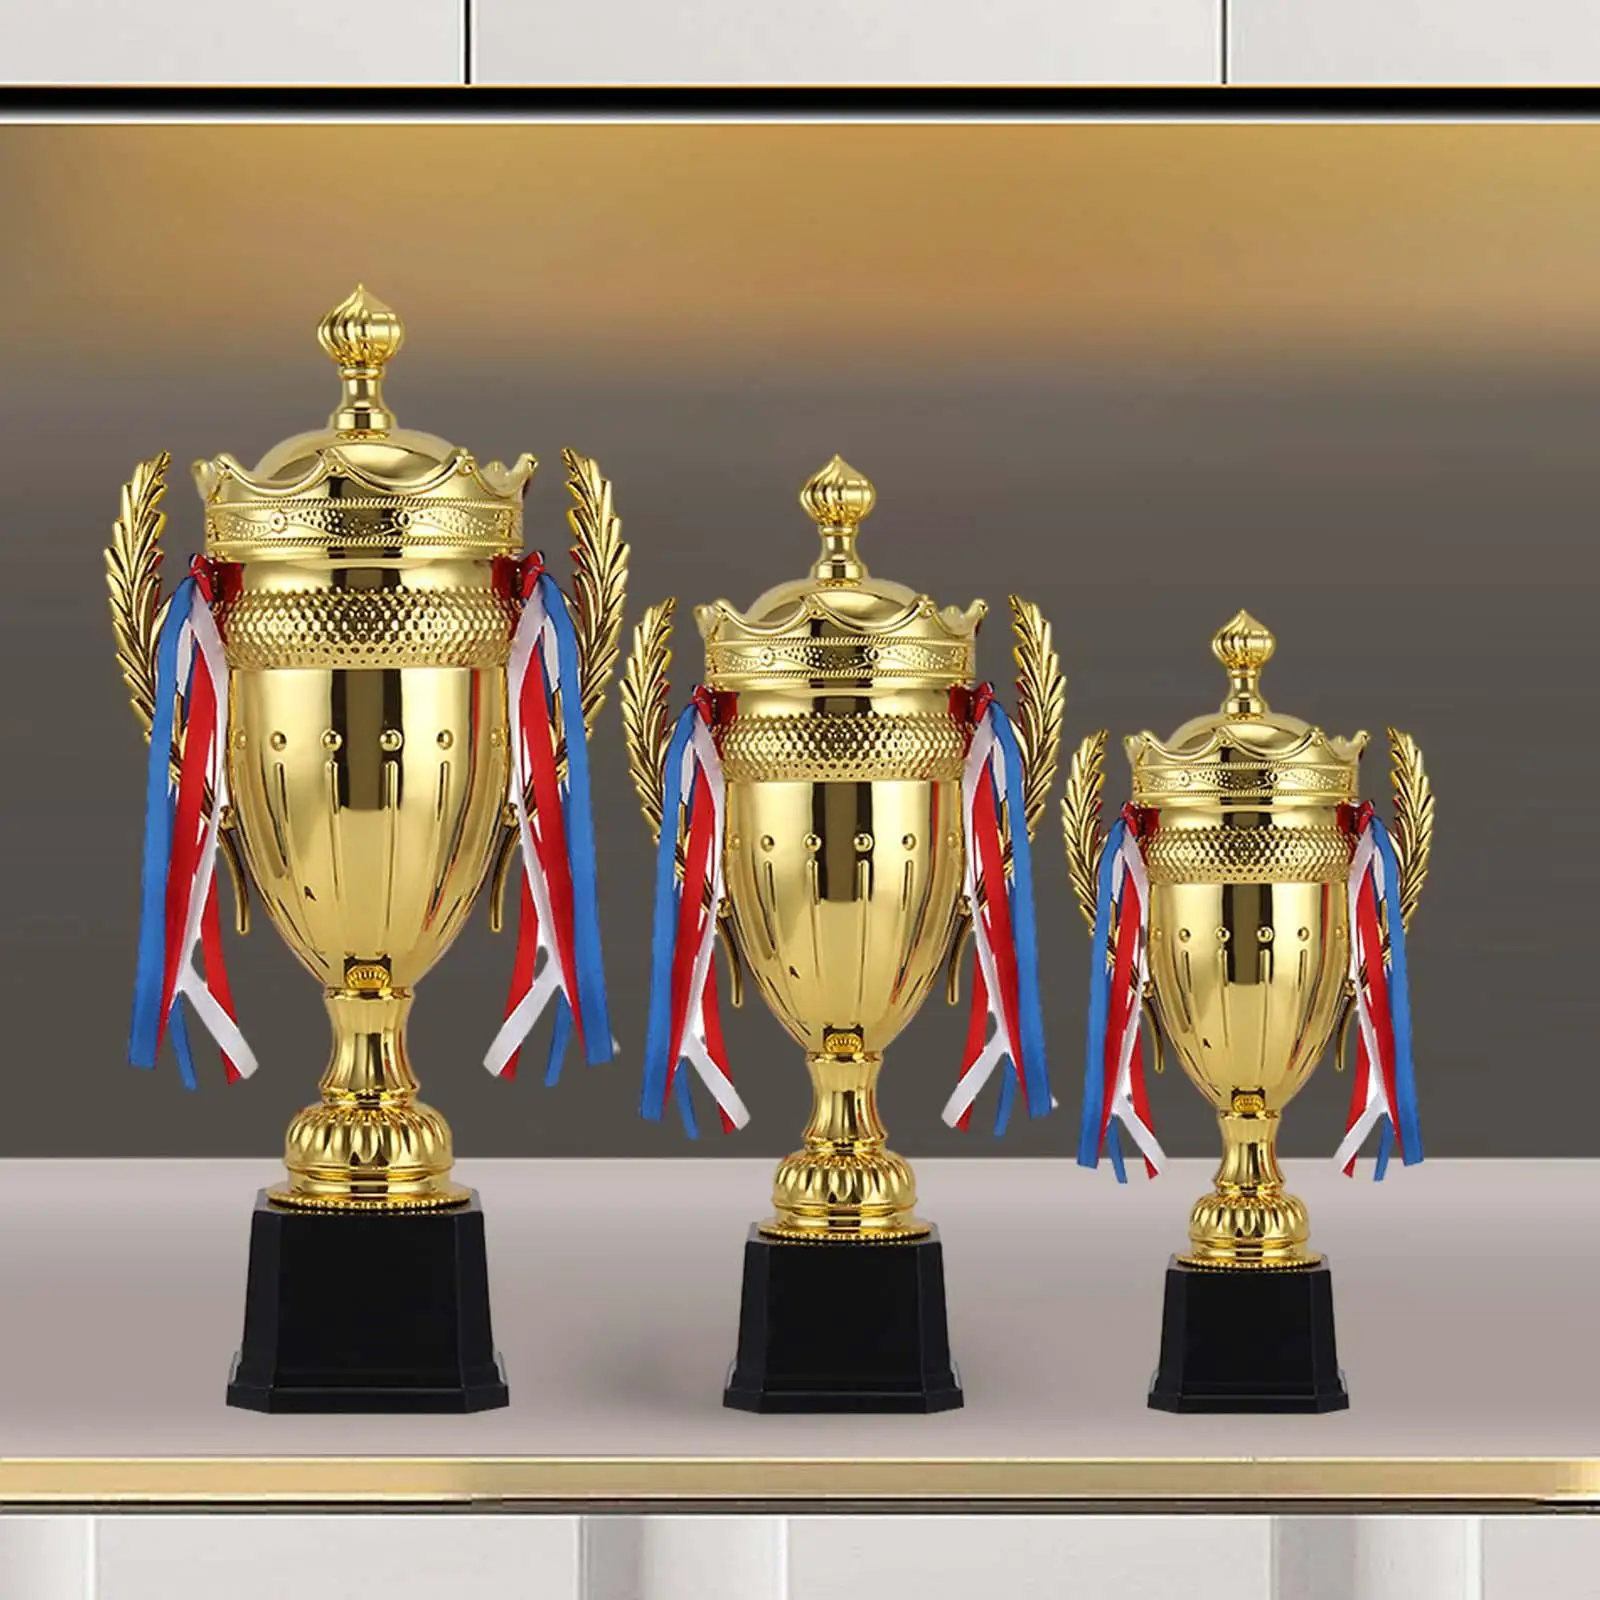 Children Trophy Participation Trophy Cup for Competitions Party Football